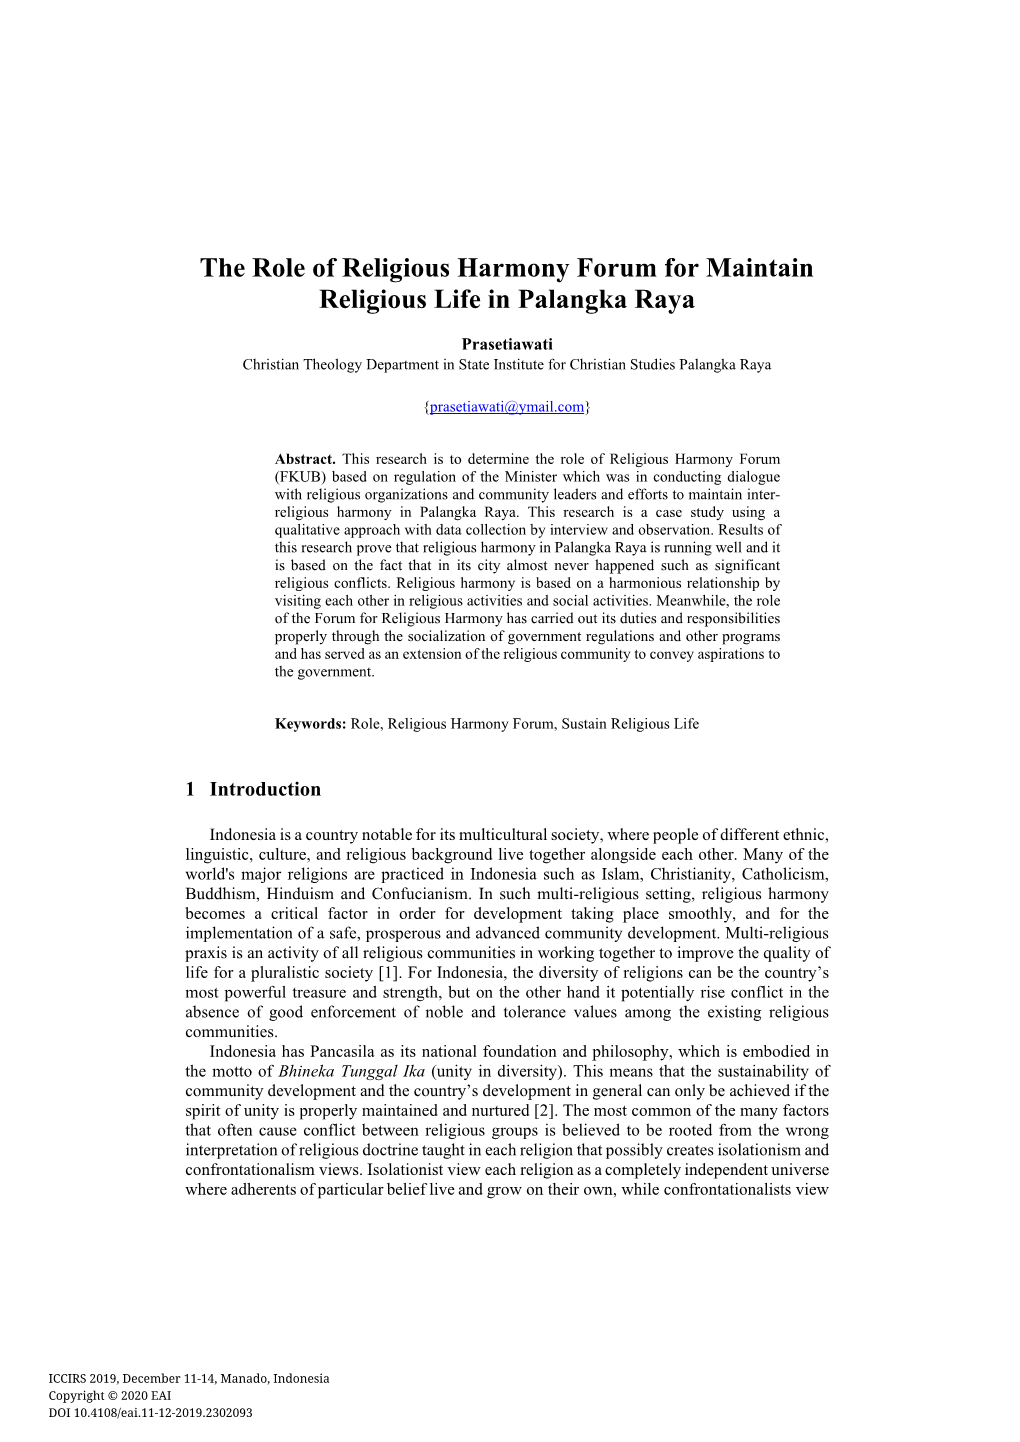 The Role of Religious Harmony Forum for Maintain Religious Life in Palangka Raya